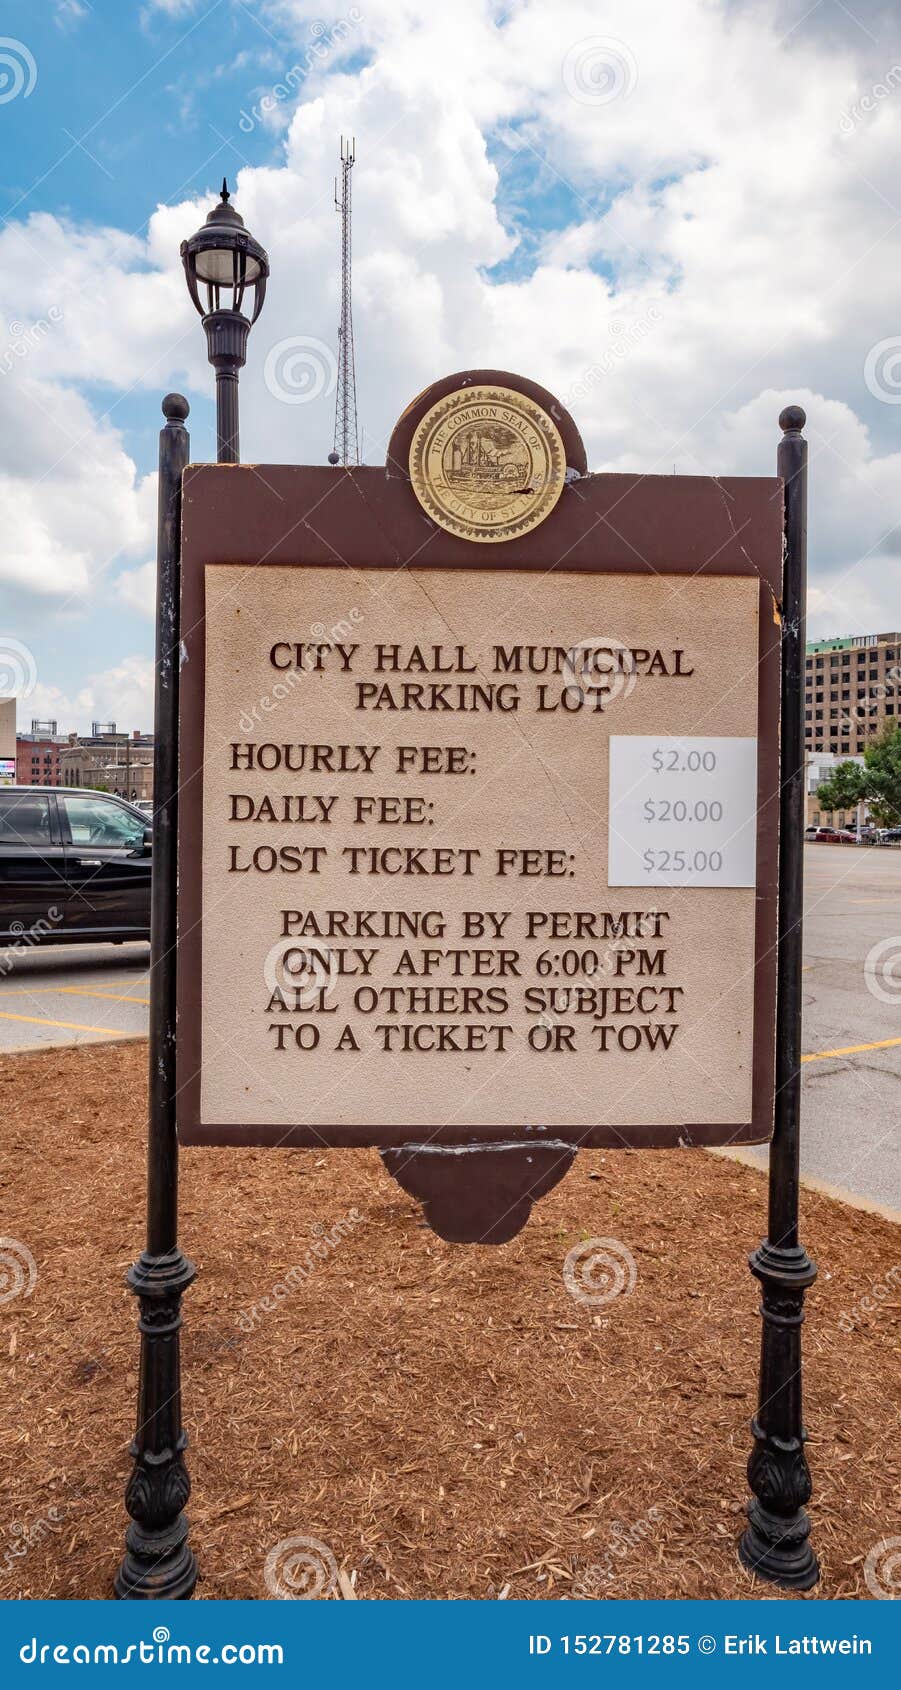 City Hall Municipal Parking Lot In St Louis - ST. LOUIS, USA - JUNE 19, 2019 Editorial Image ...